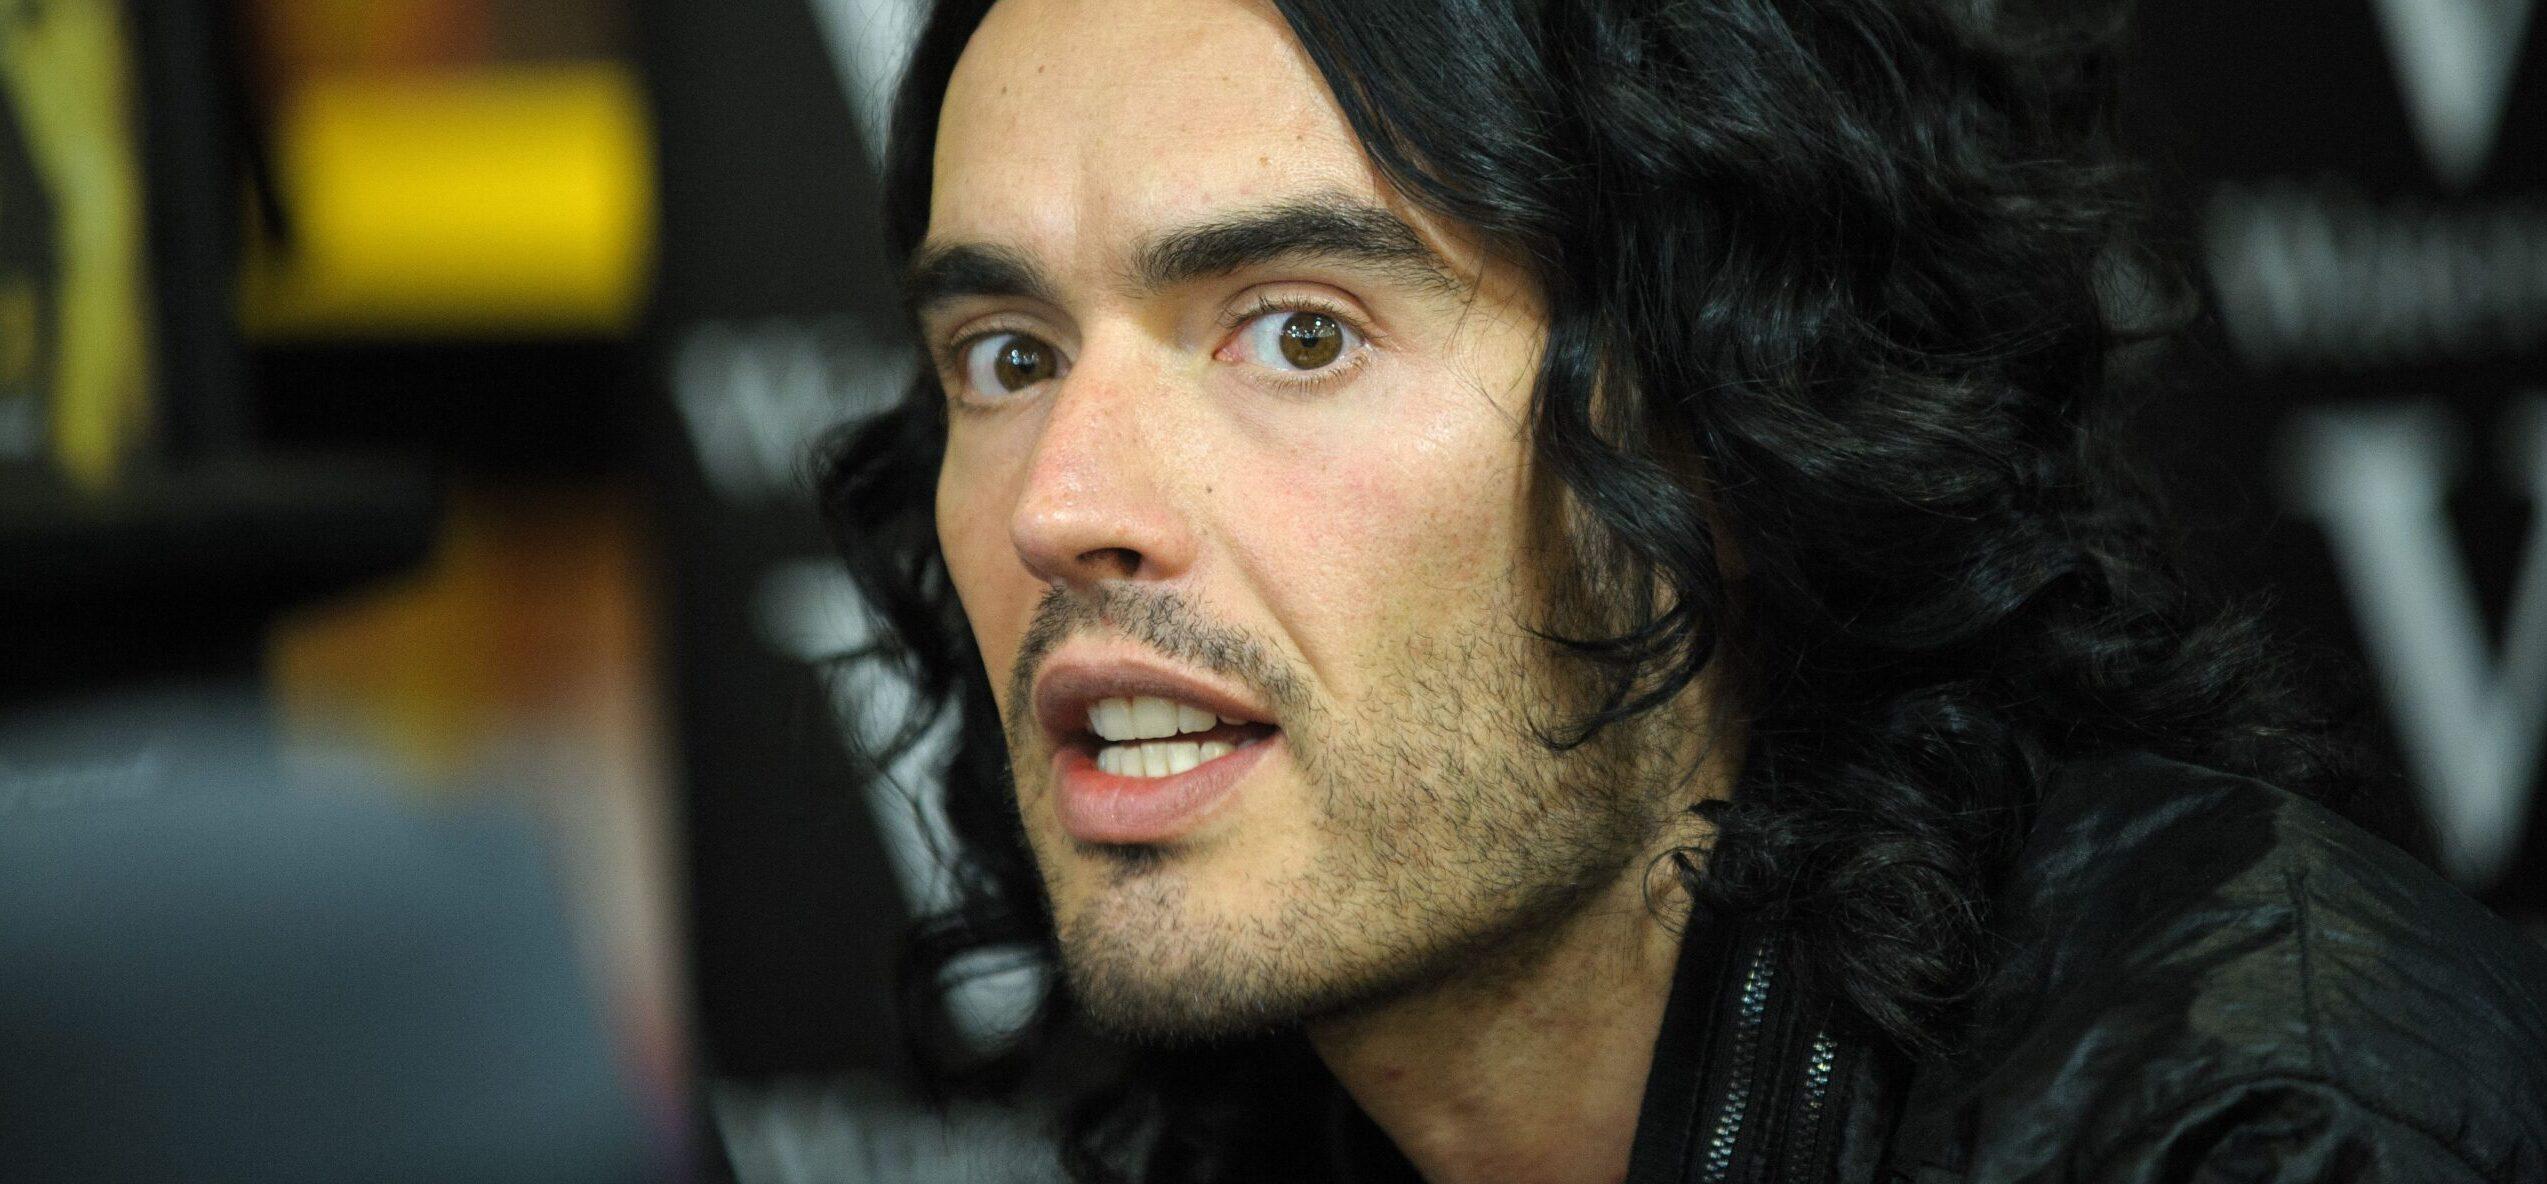 Underfire comedian Russell Brand , pictured here in 2010 in Edinburgh for a book signing for his second book 